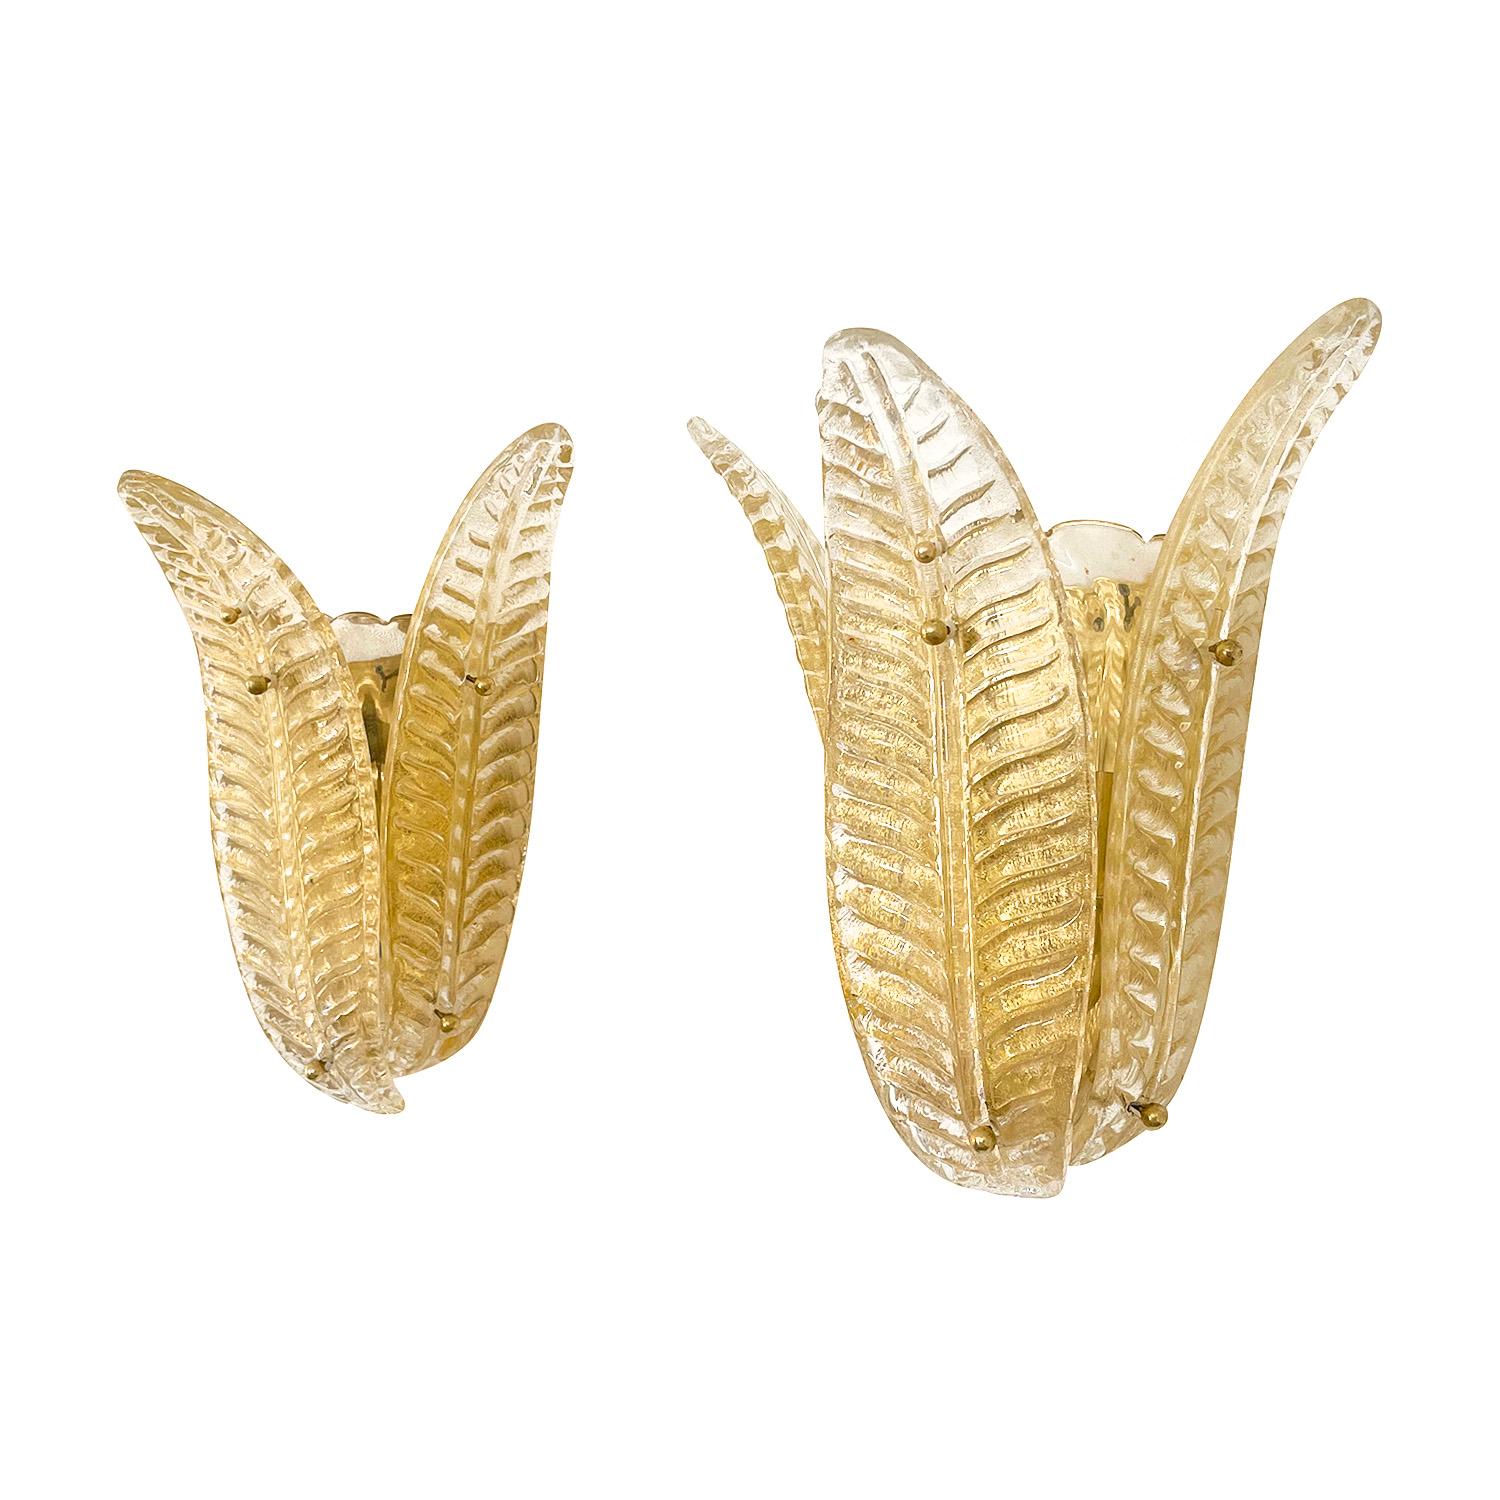 20th Century Italian Pair of Murano Glass Sommerso, Brass Leaf Wall Appliques In Good Condition For Sale In West Palm Beach, FL